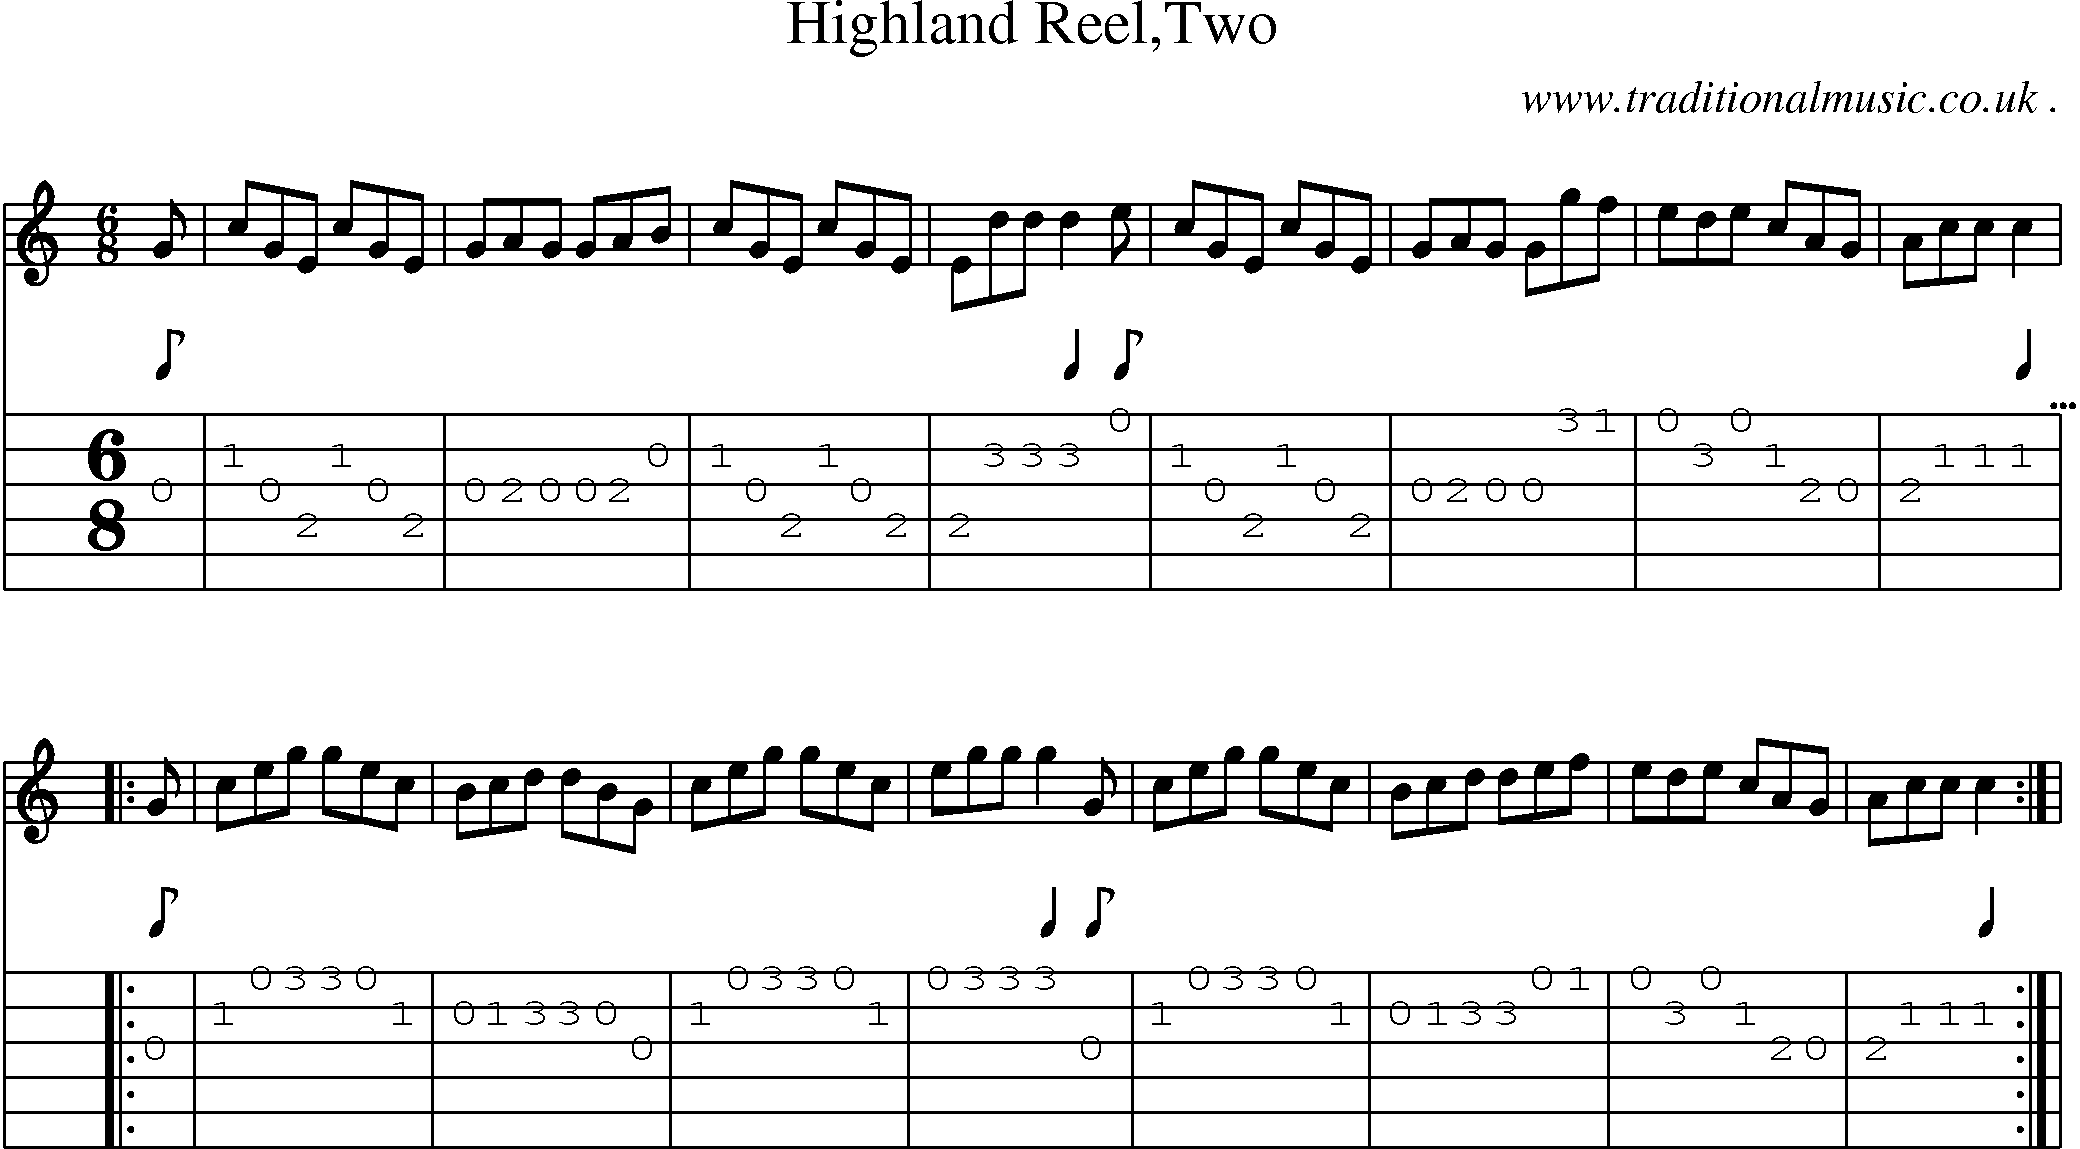 Sheet-Music and Guitar Tabs for Highland Reeltwo